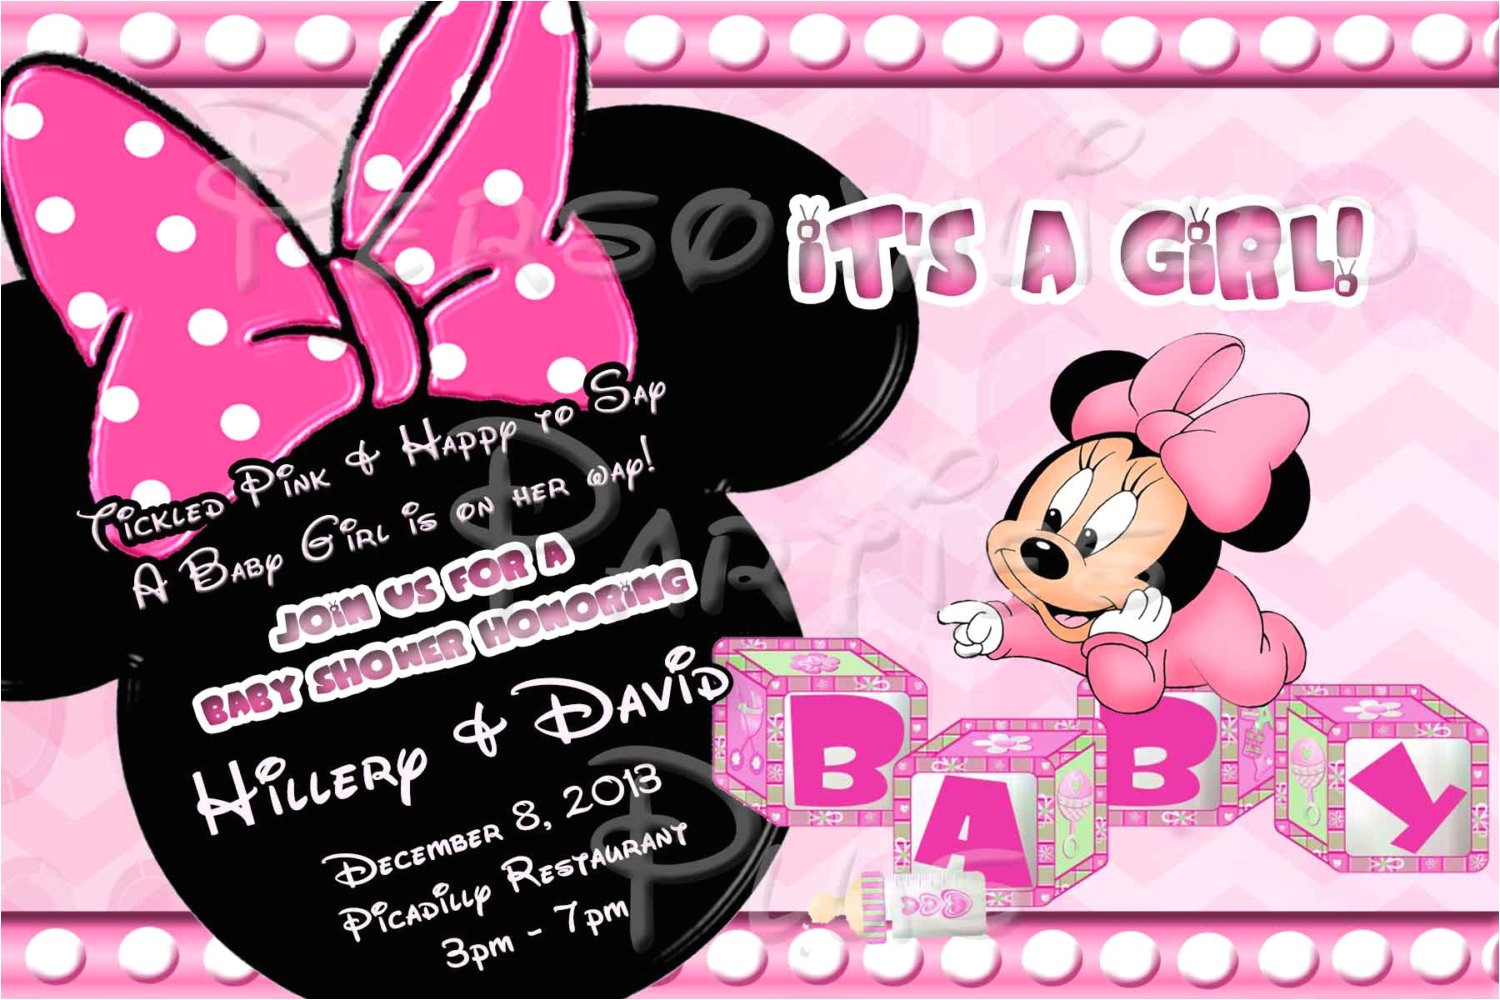 Baby Minnie Mouse Baby Shower Invitations Baby Shower De Minnie Mouse Imagui